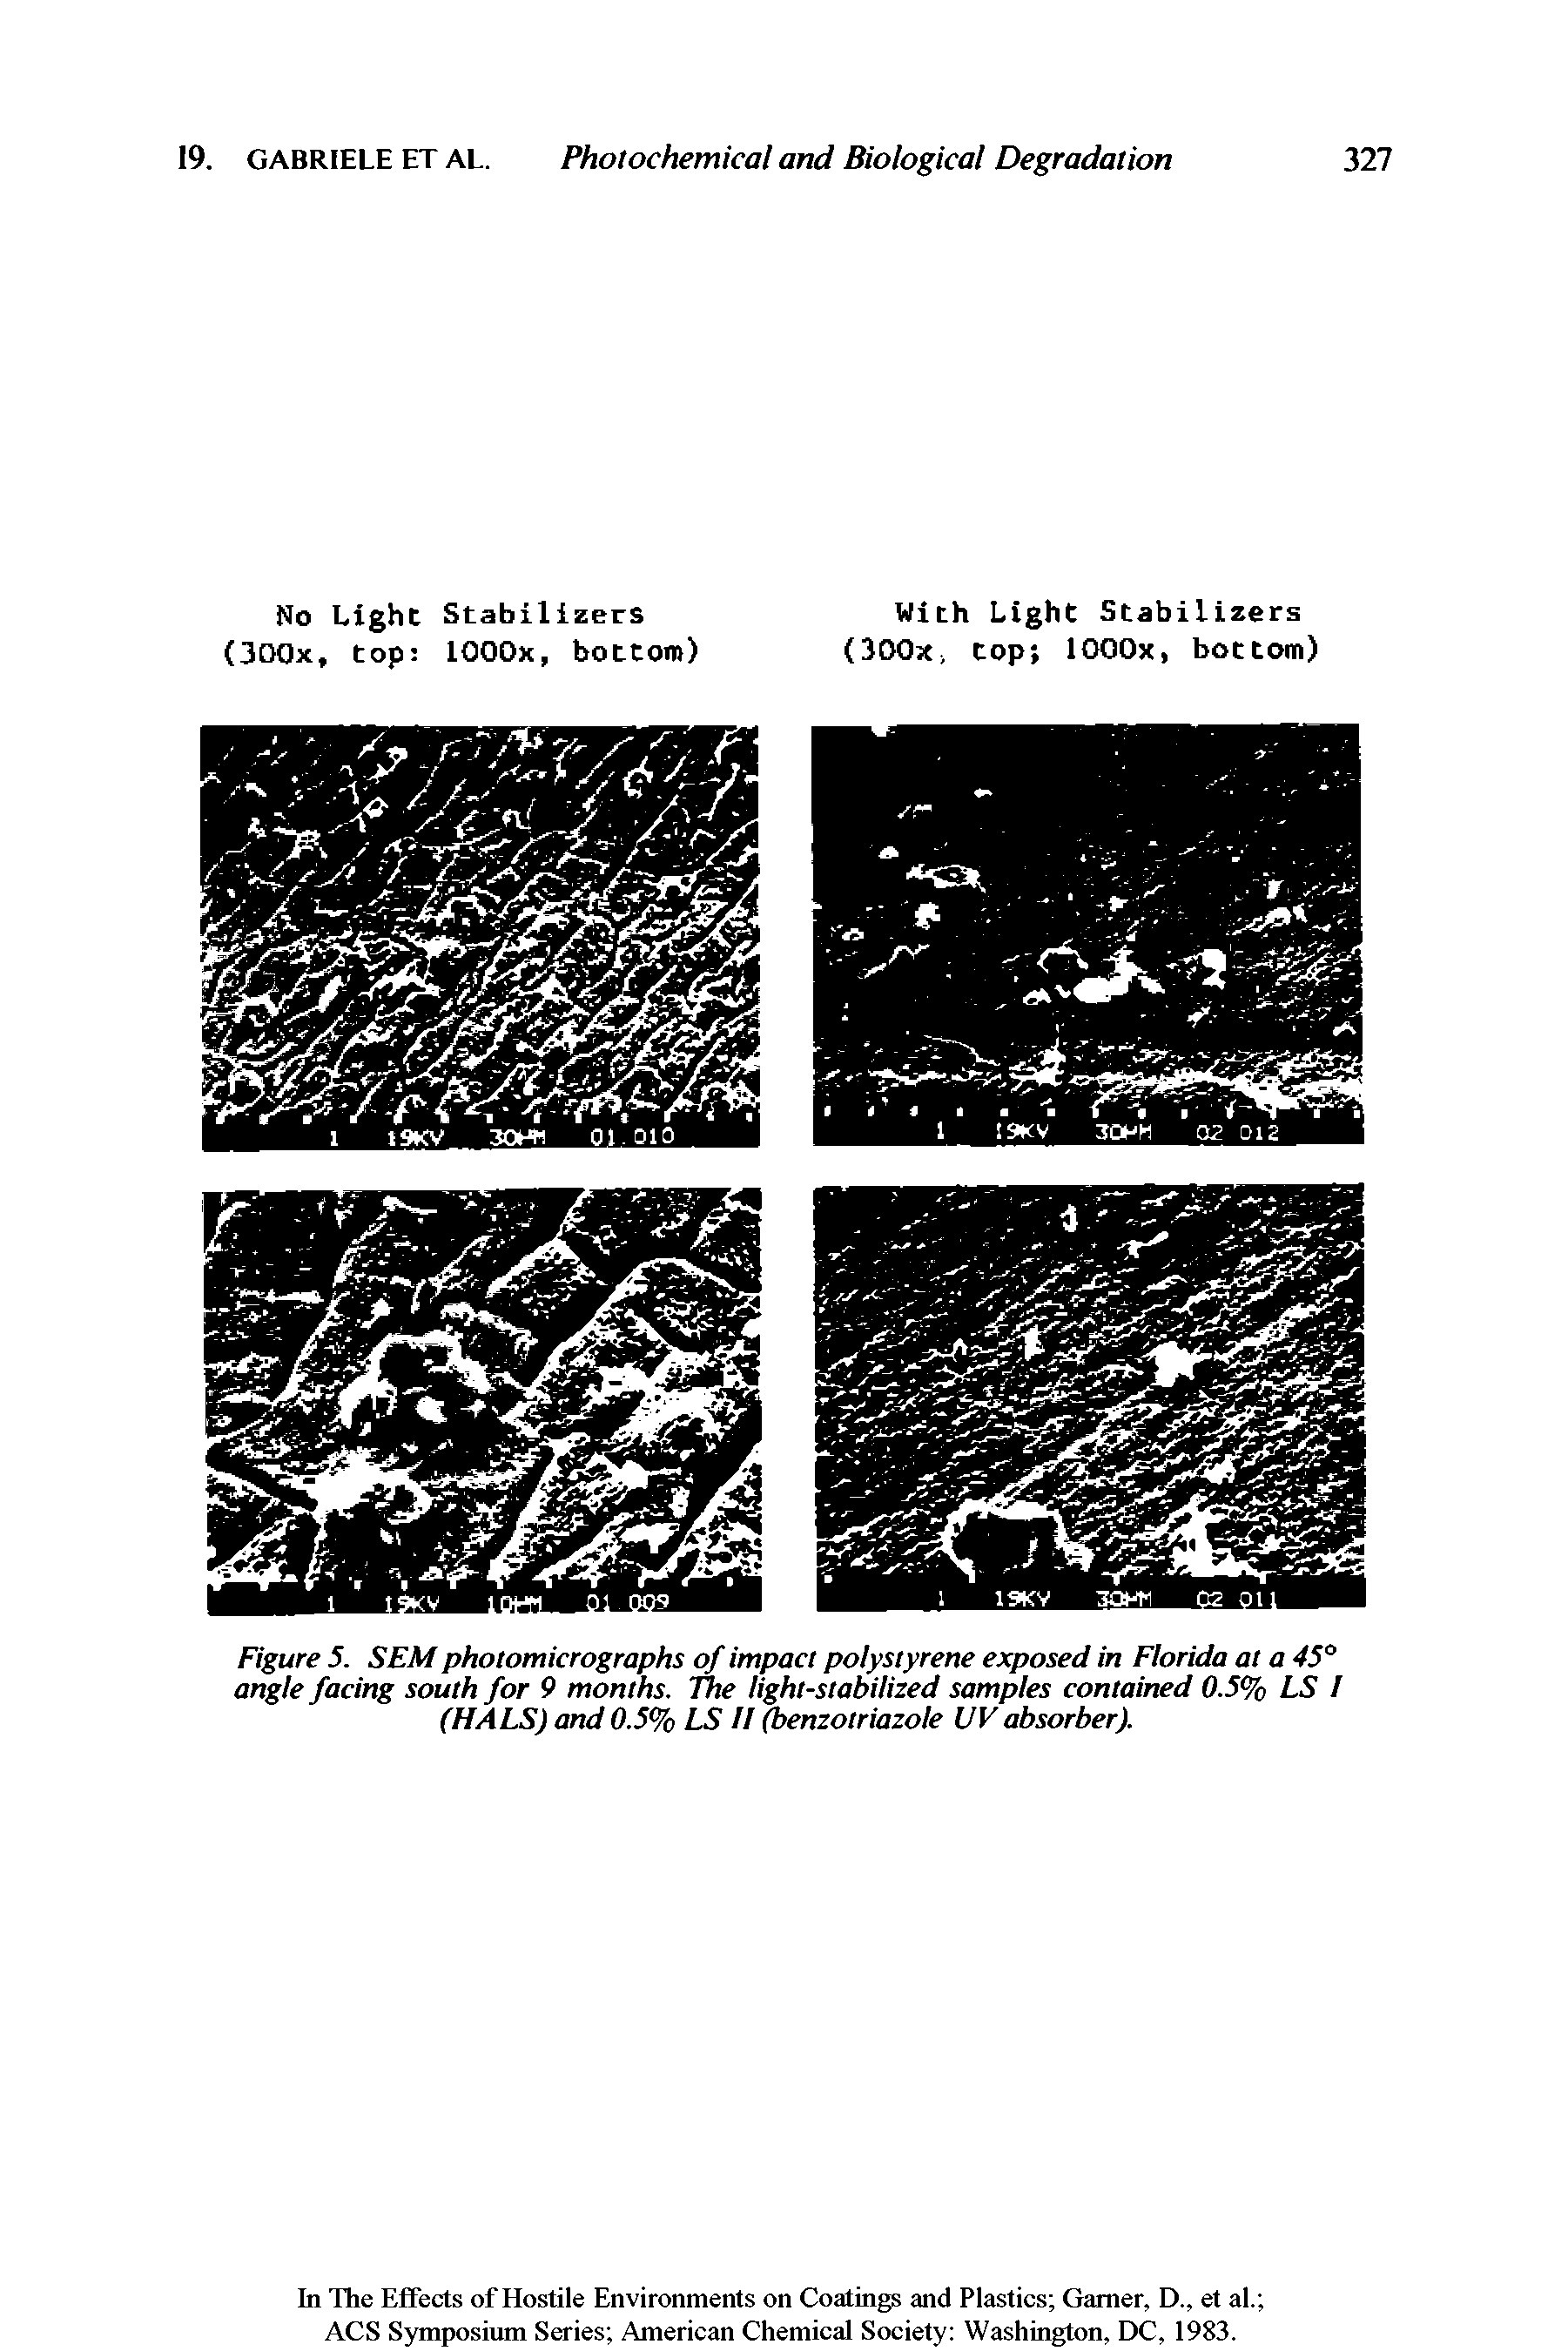 Figure 5. SEM photomicrographs of impact polystyrene exposed in Florida at a 45° angle facing south for 9 months. The light-stabilized samples contained 0.5% LS / (HALS) and 0.5% LS H enzotriazole UV absorber).